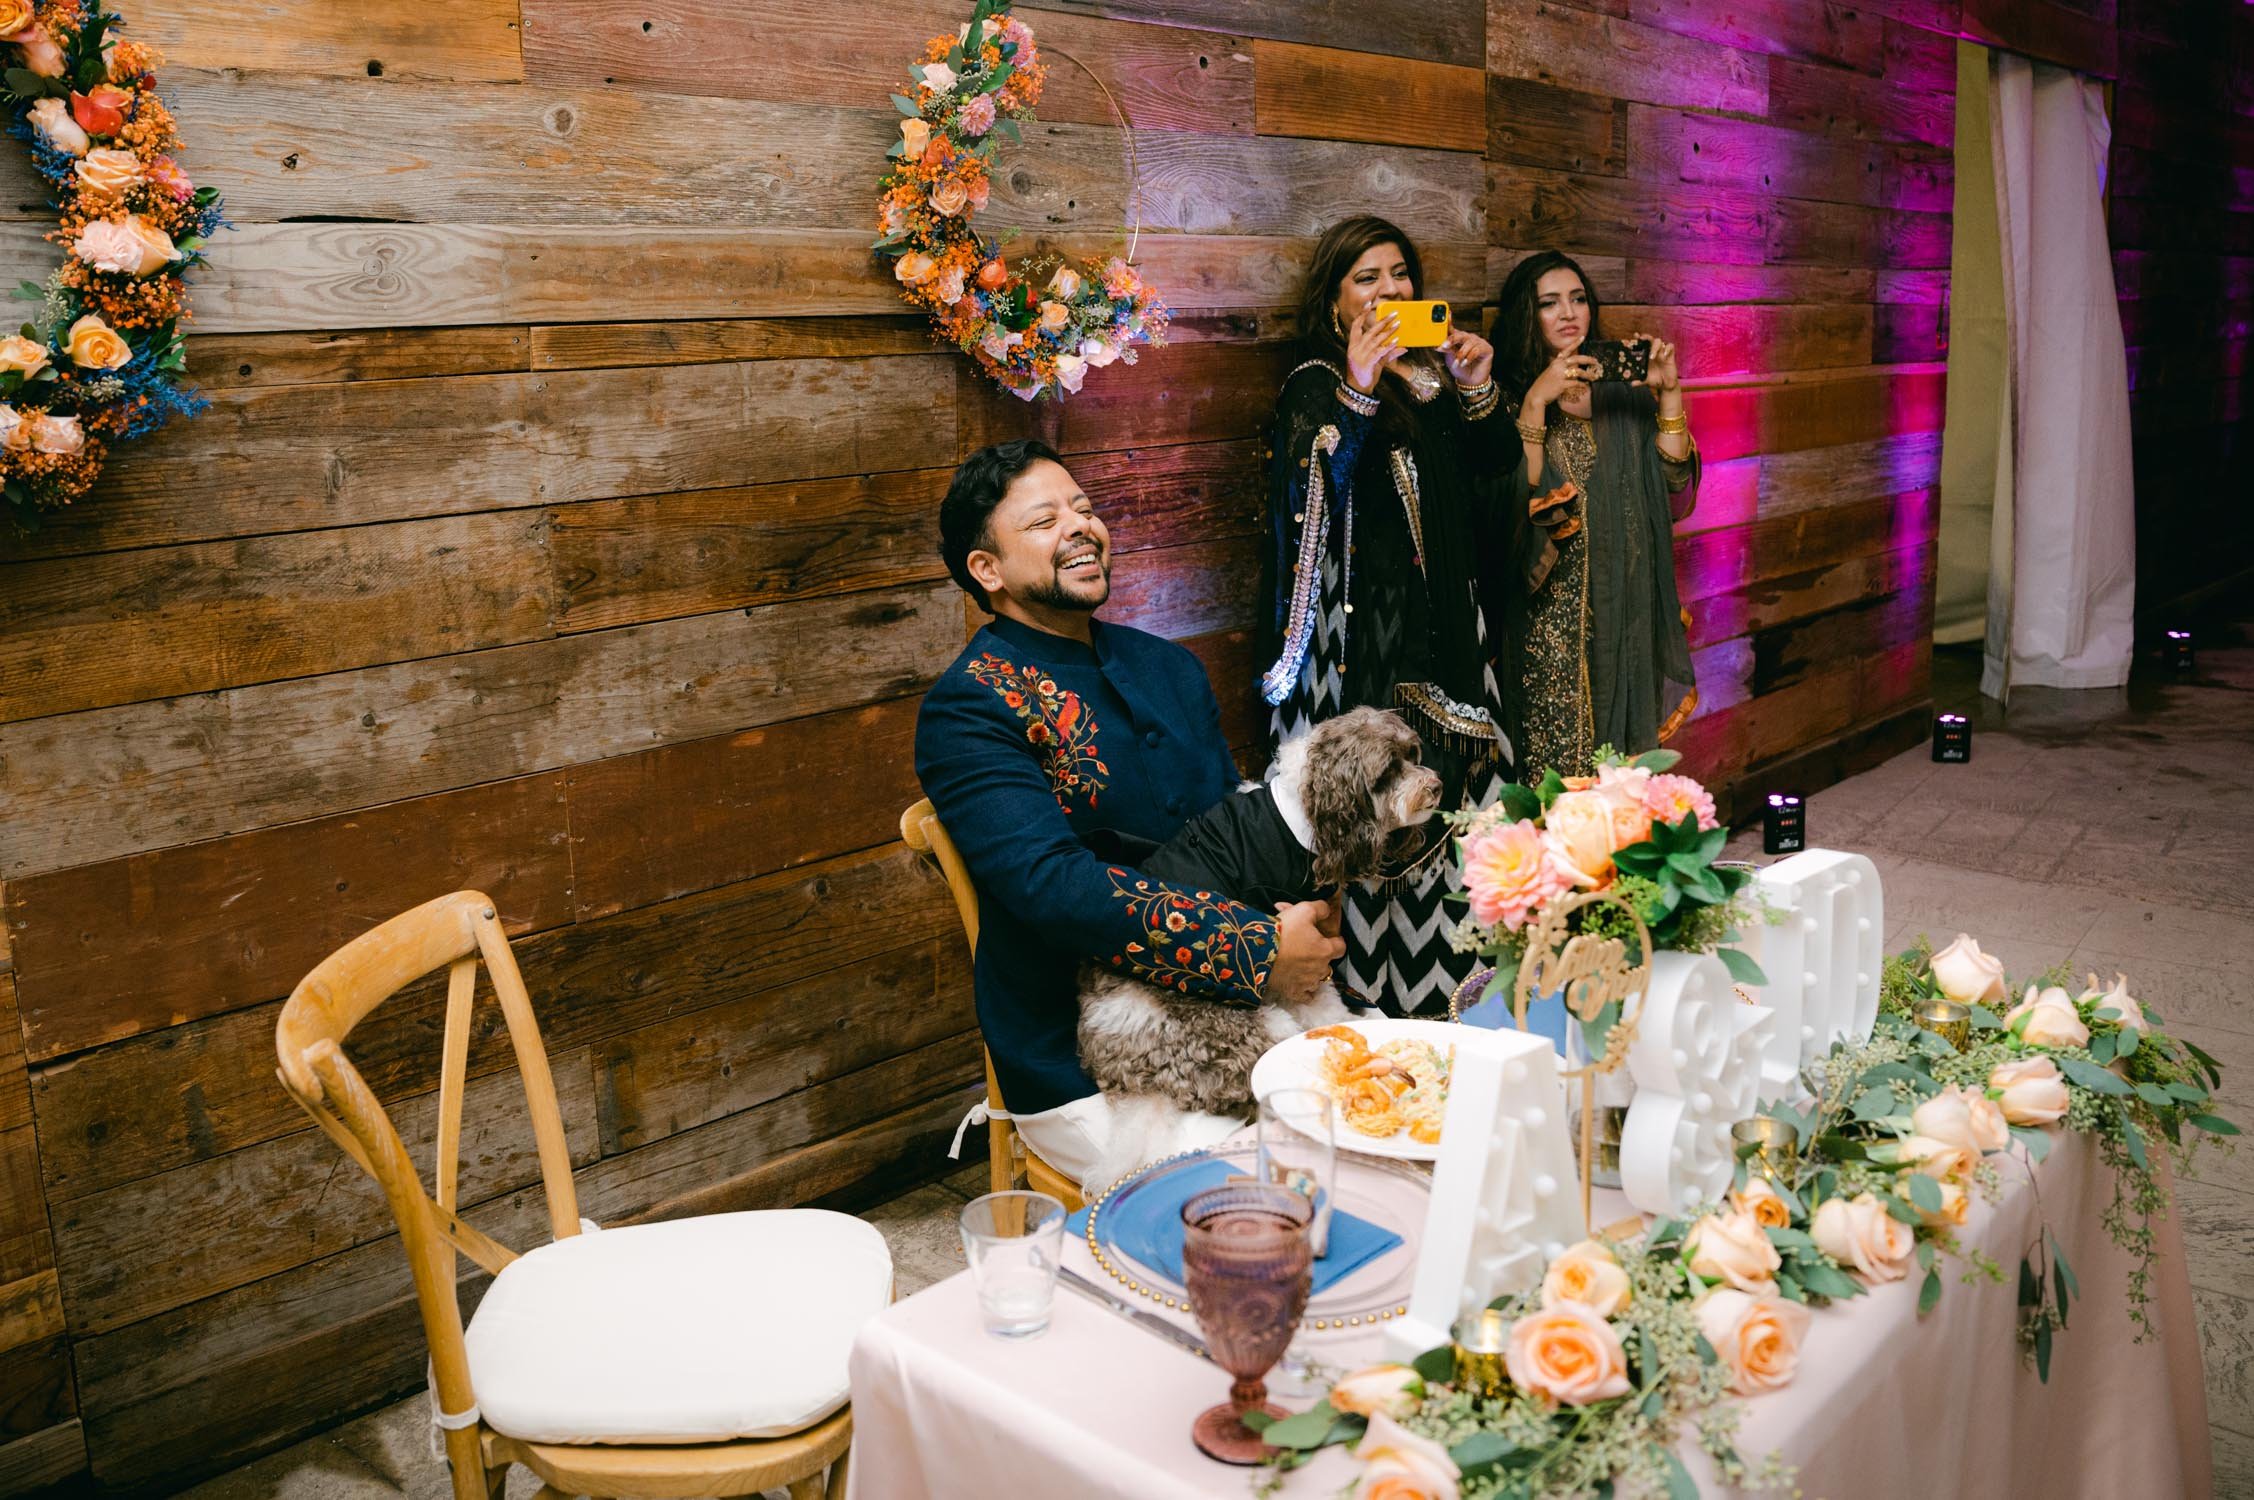 Indian wedding reception, photo of groom reacting to his bride's dance